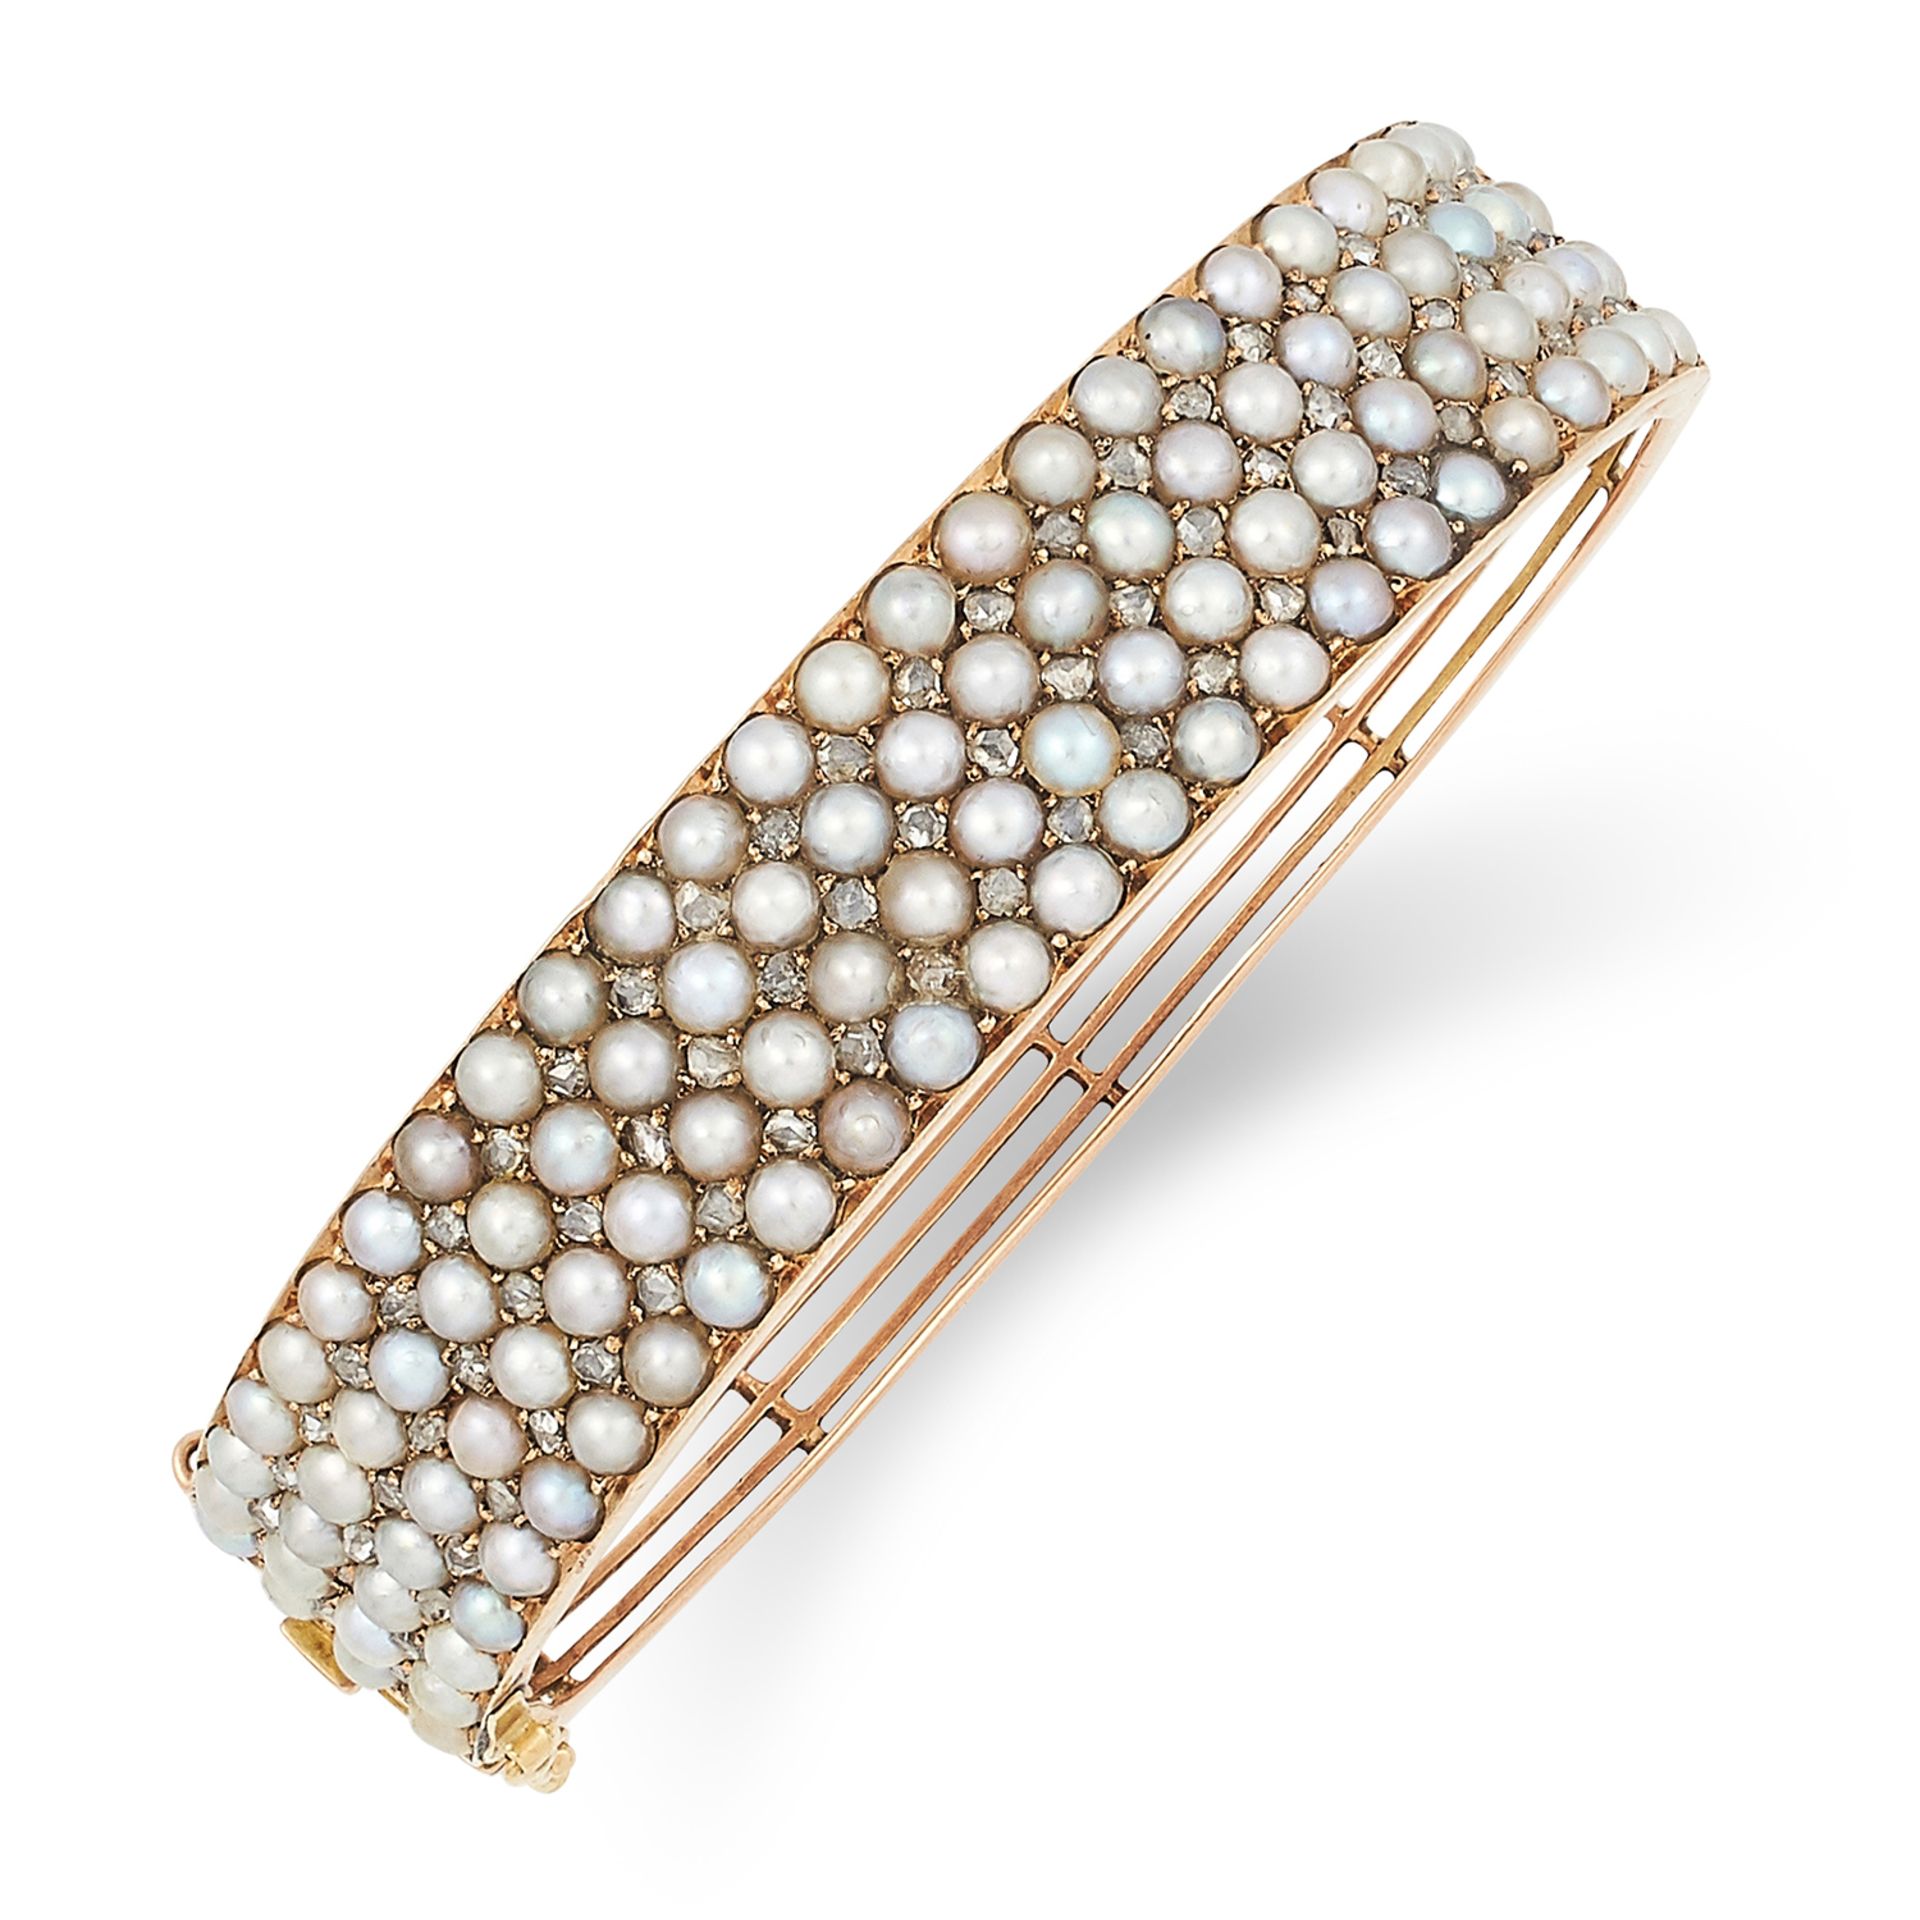 ANTIQUE PEARL AND DIAMOND BANGLE set with seed pearls and rose cut diamonds, 6cm inner diameter,